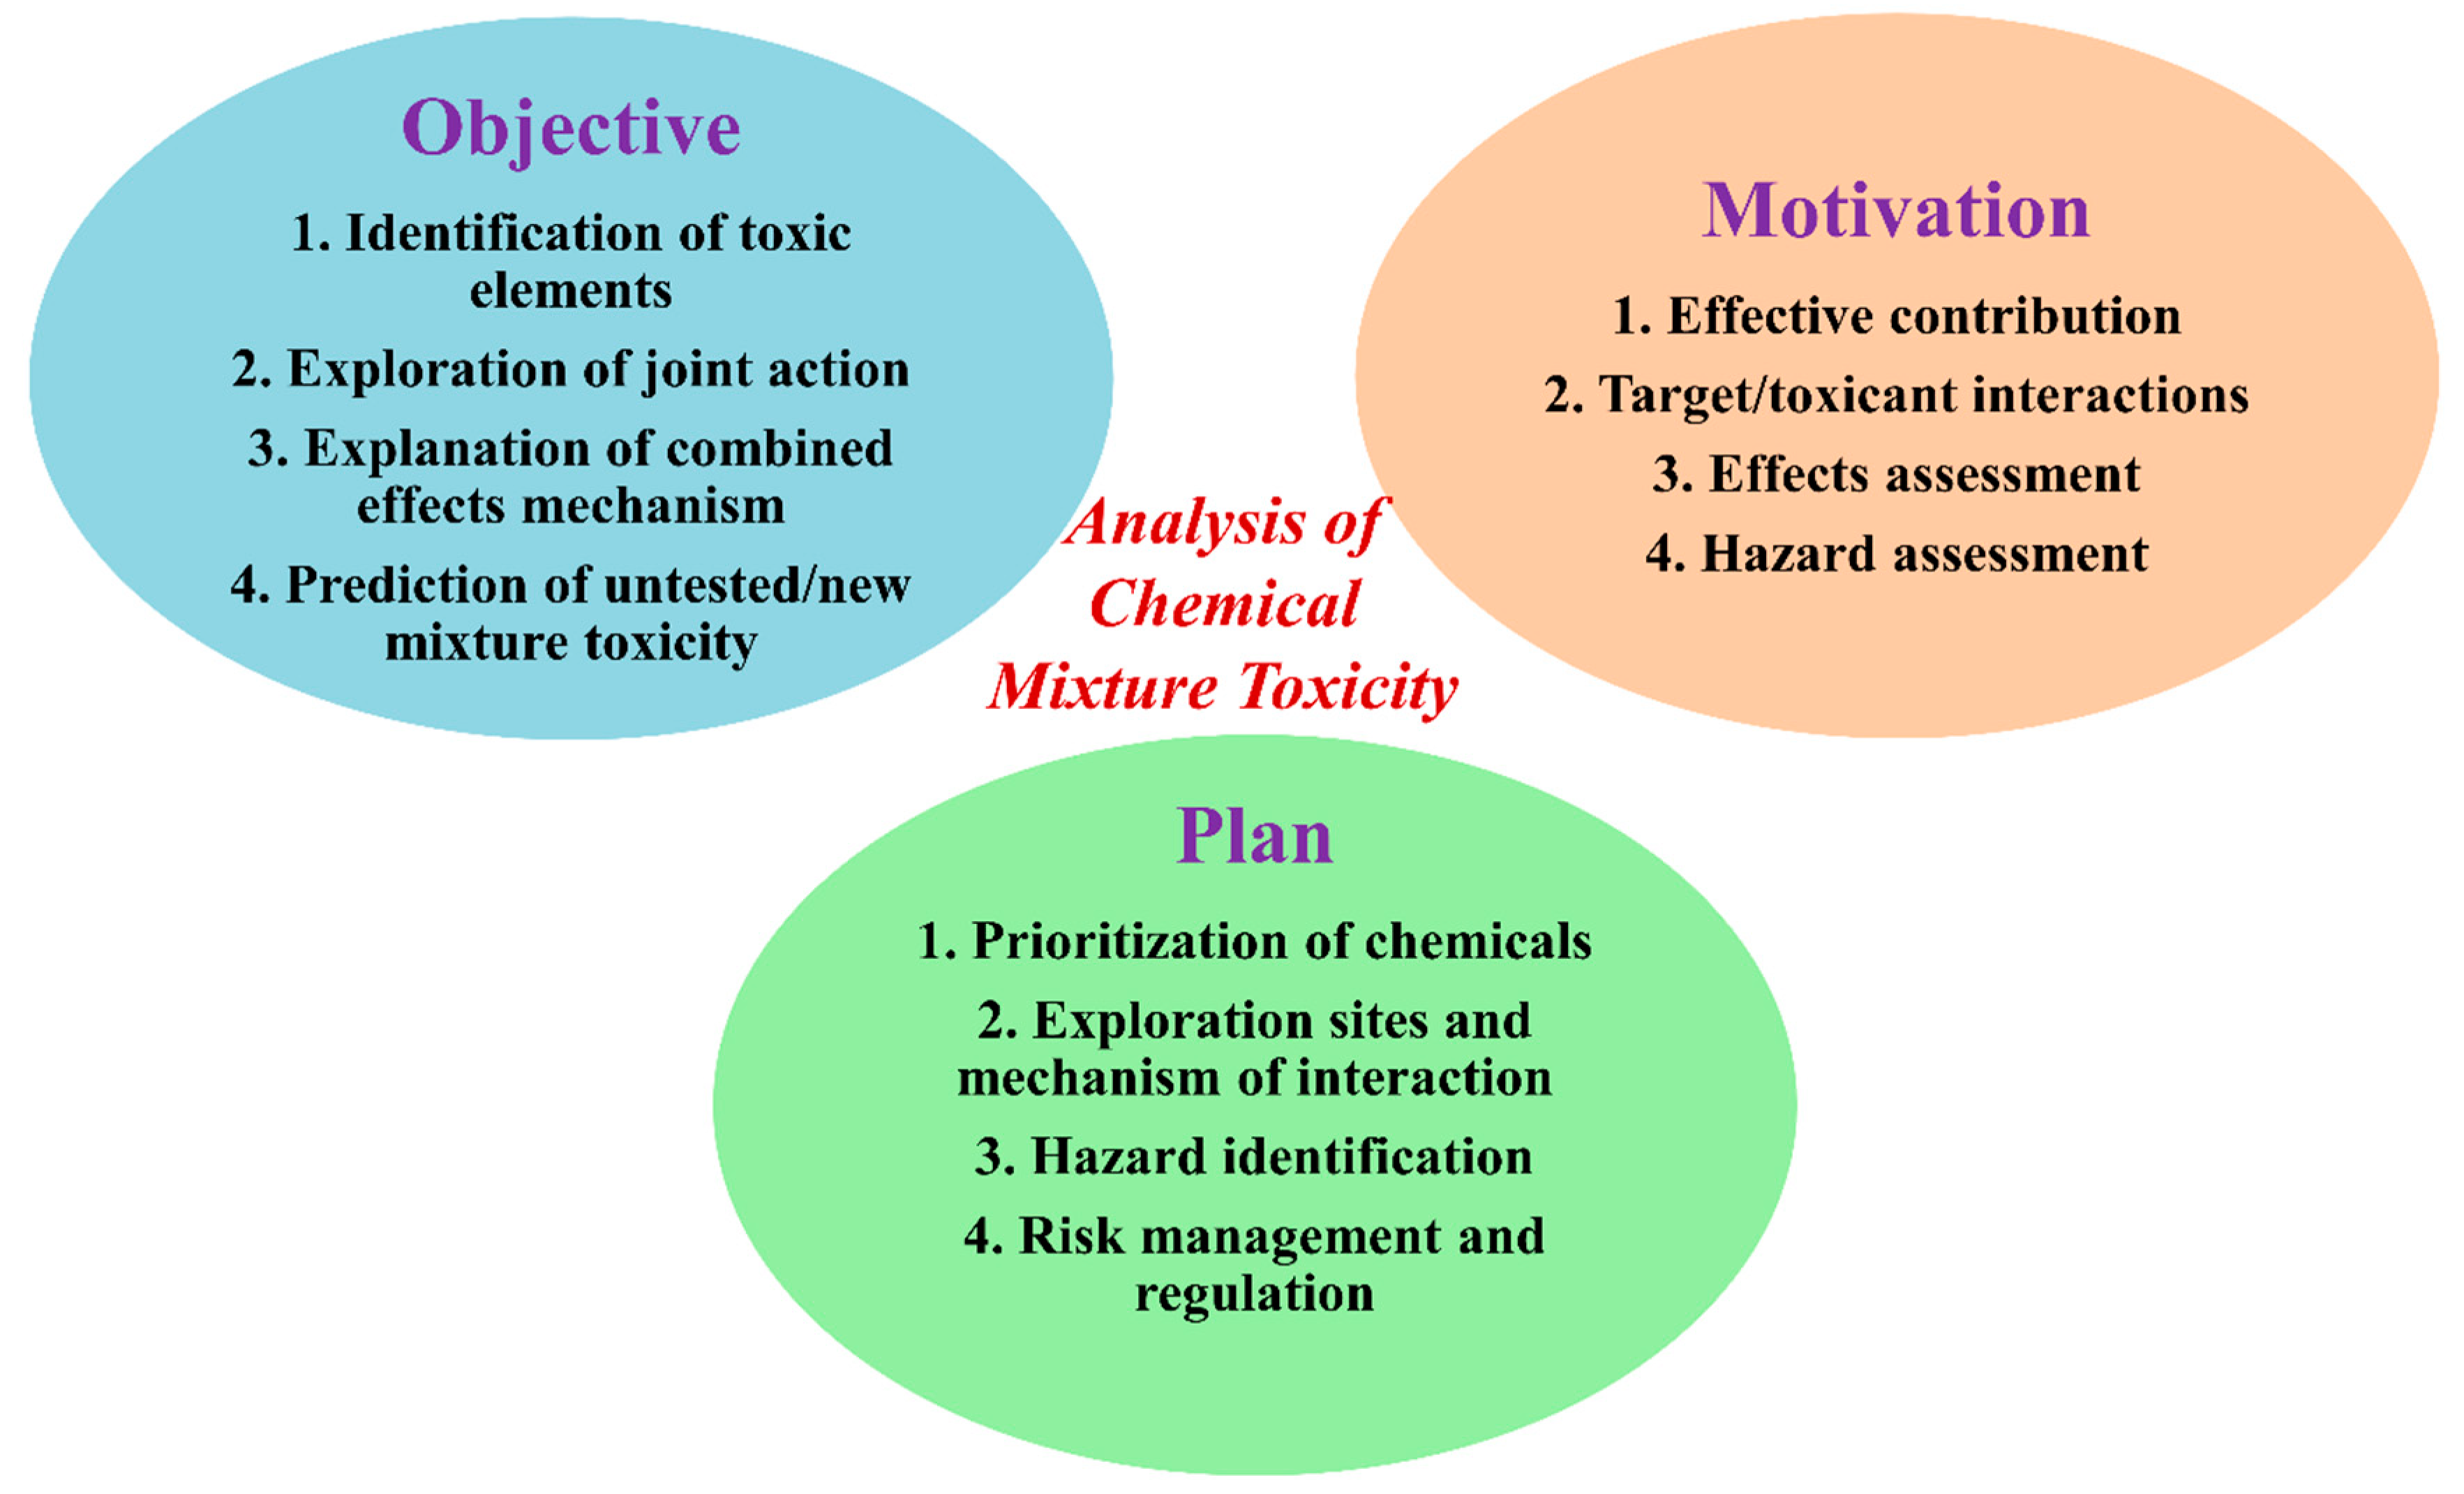 Machine Learning Toxicity Prediction: Latest Advances by Toxicity